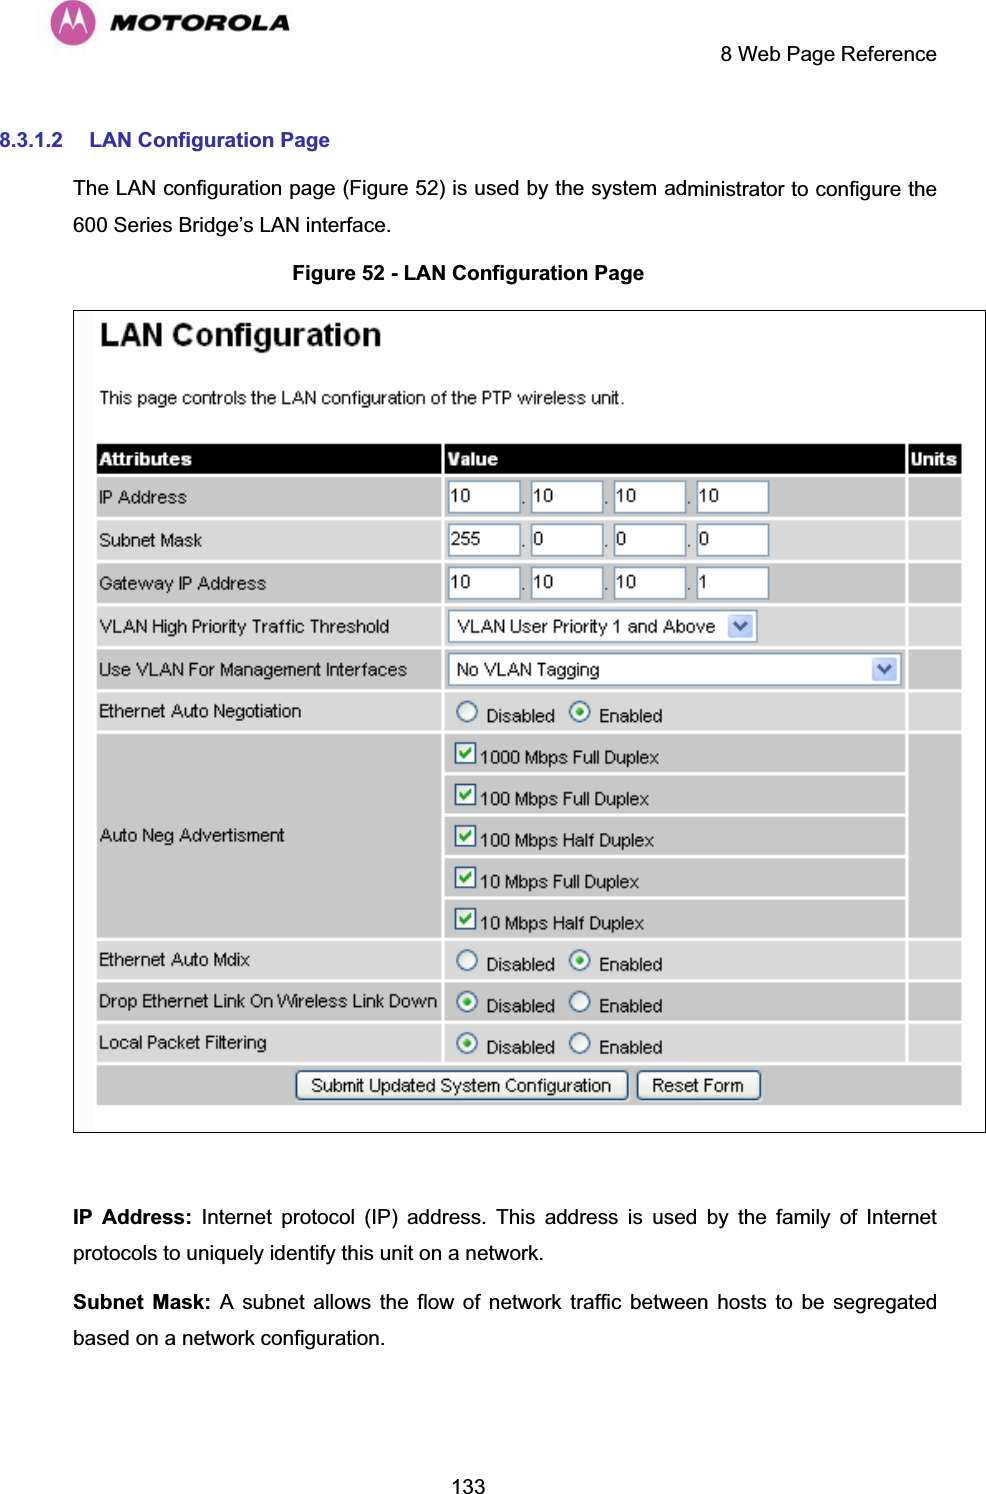     8 Web Page Reference  1338.3.1.2  LAN Configuration Page The LAN configuration page (Figure 52) is used by the system administrator to configure the 600 Series Bridge’s LAN interface. Figure 52 - LAN Configuration Page  IP Address: Internet protocol (IP) address. This address is used by the family of Internet protocols to uniquely identify this unit on a network.  Subnet Mask: A subnet allows the flow of network traffic between hosts to be segregated based on a network configuration.  